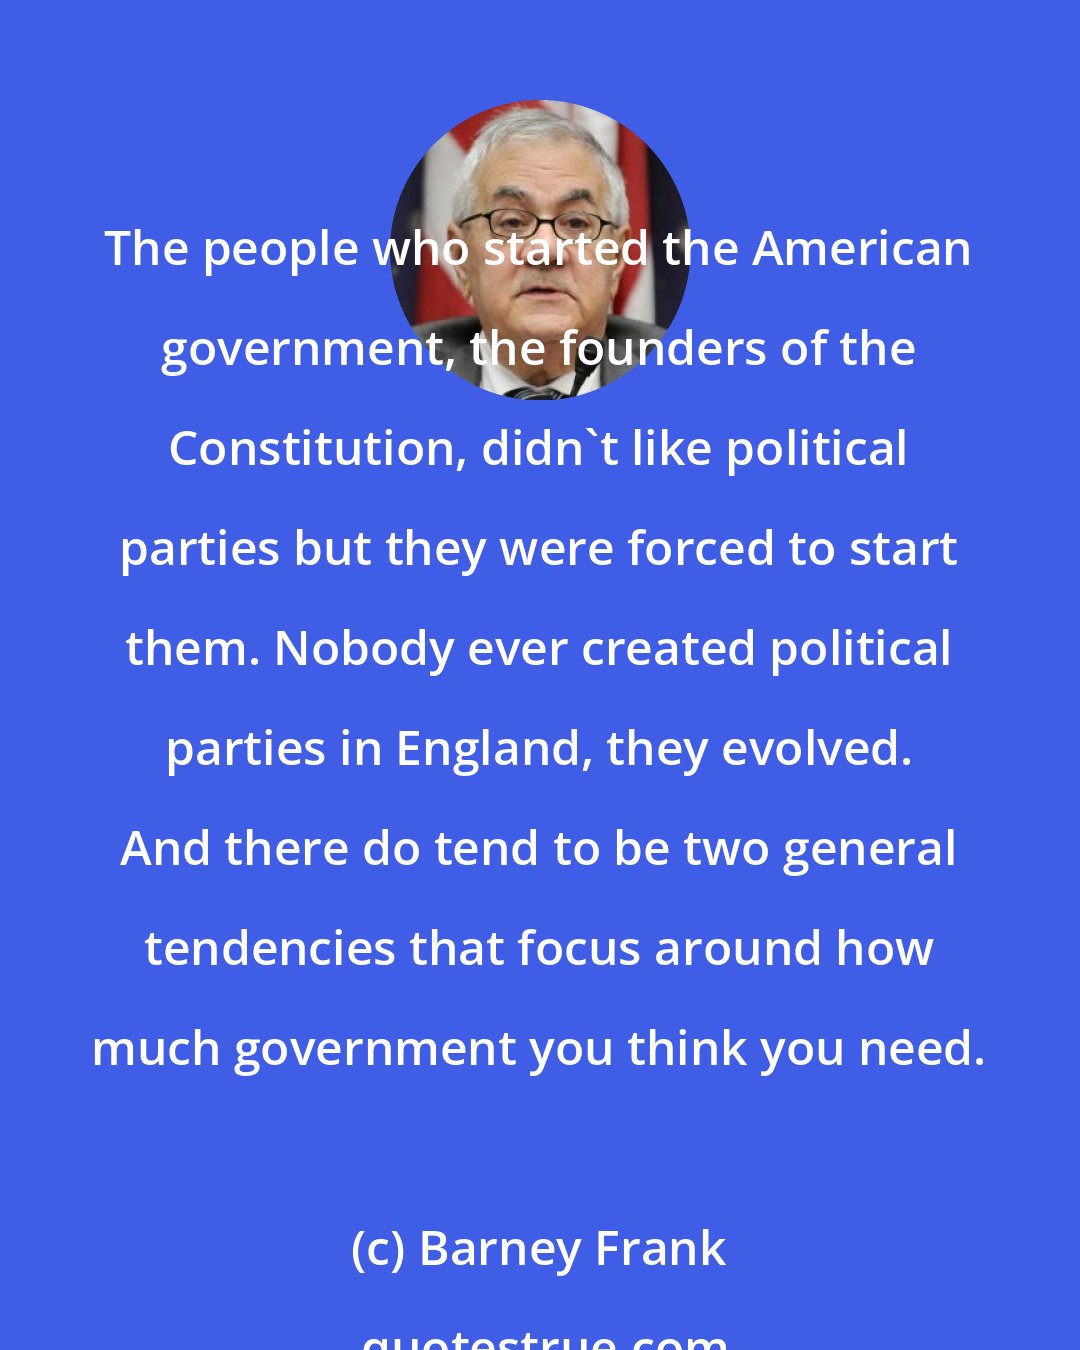 Barney Frank: The people who started the American government, the founders of the Constitution, didn't like political parties but they were forced to start them. Nobody ever created political parties in England, they evolved. And there do tend to be two general tendencies that focus around how much government you think you need.